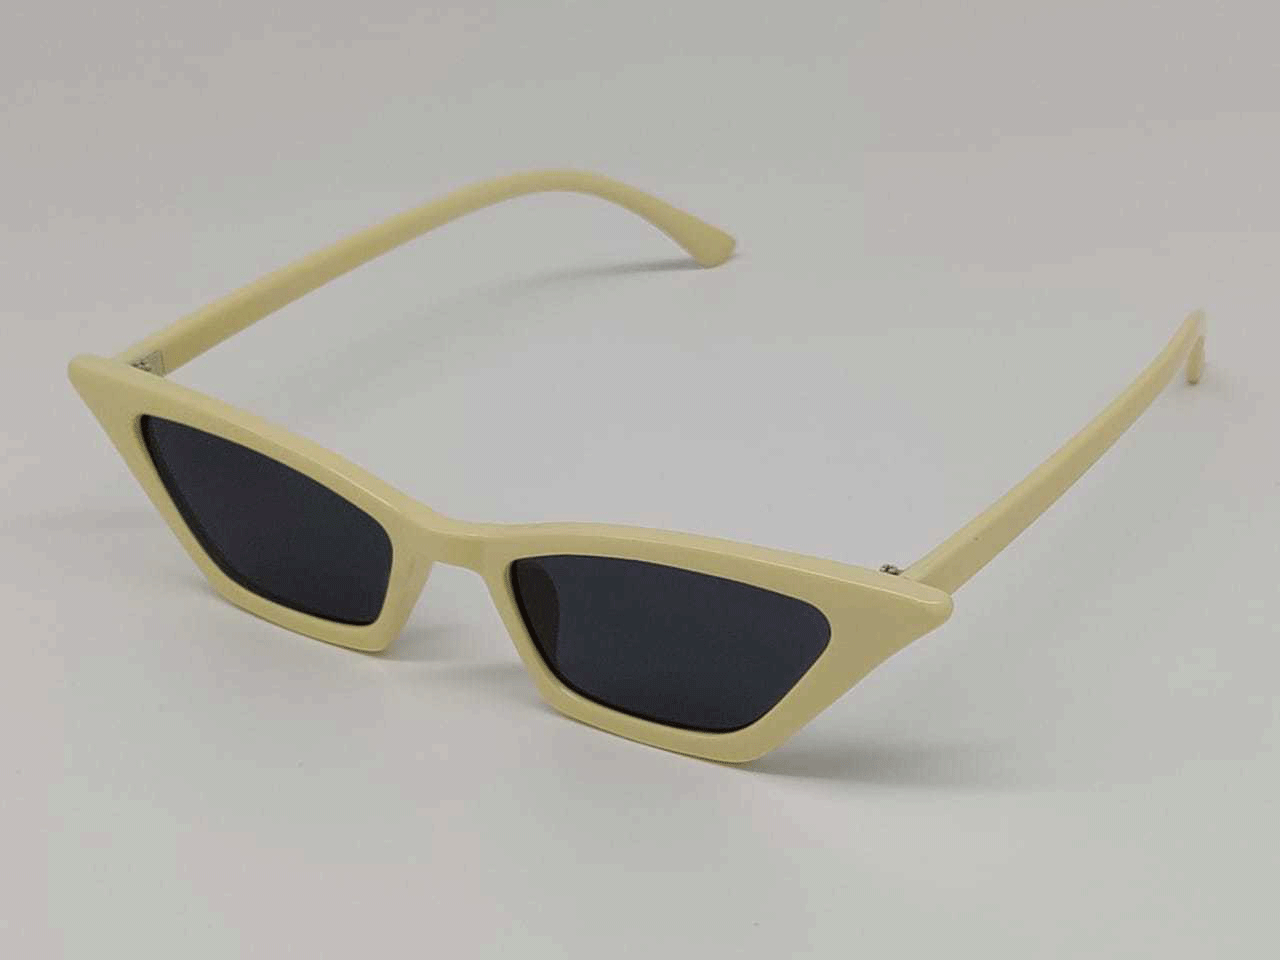 Mens Round Sunglasses Attitude Toad Round Cat Eye Ladies Fashion Sunglasses Cycling  Sunglasses For Women With Box Rezhezrh205g From Cfgtre, $23.52